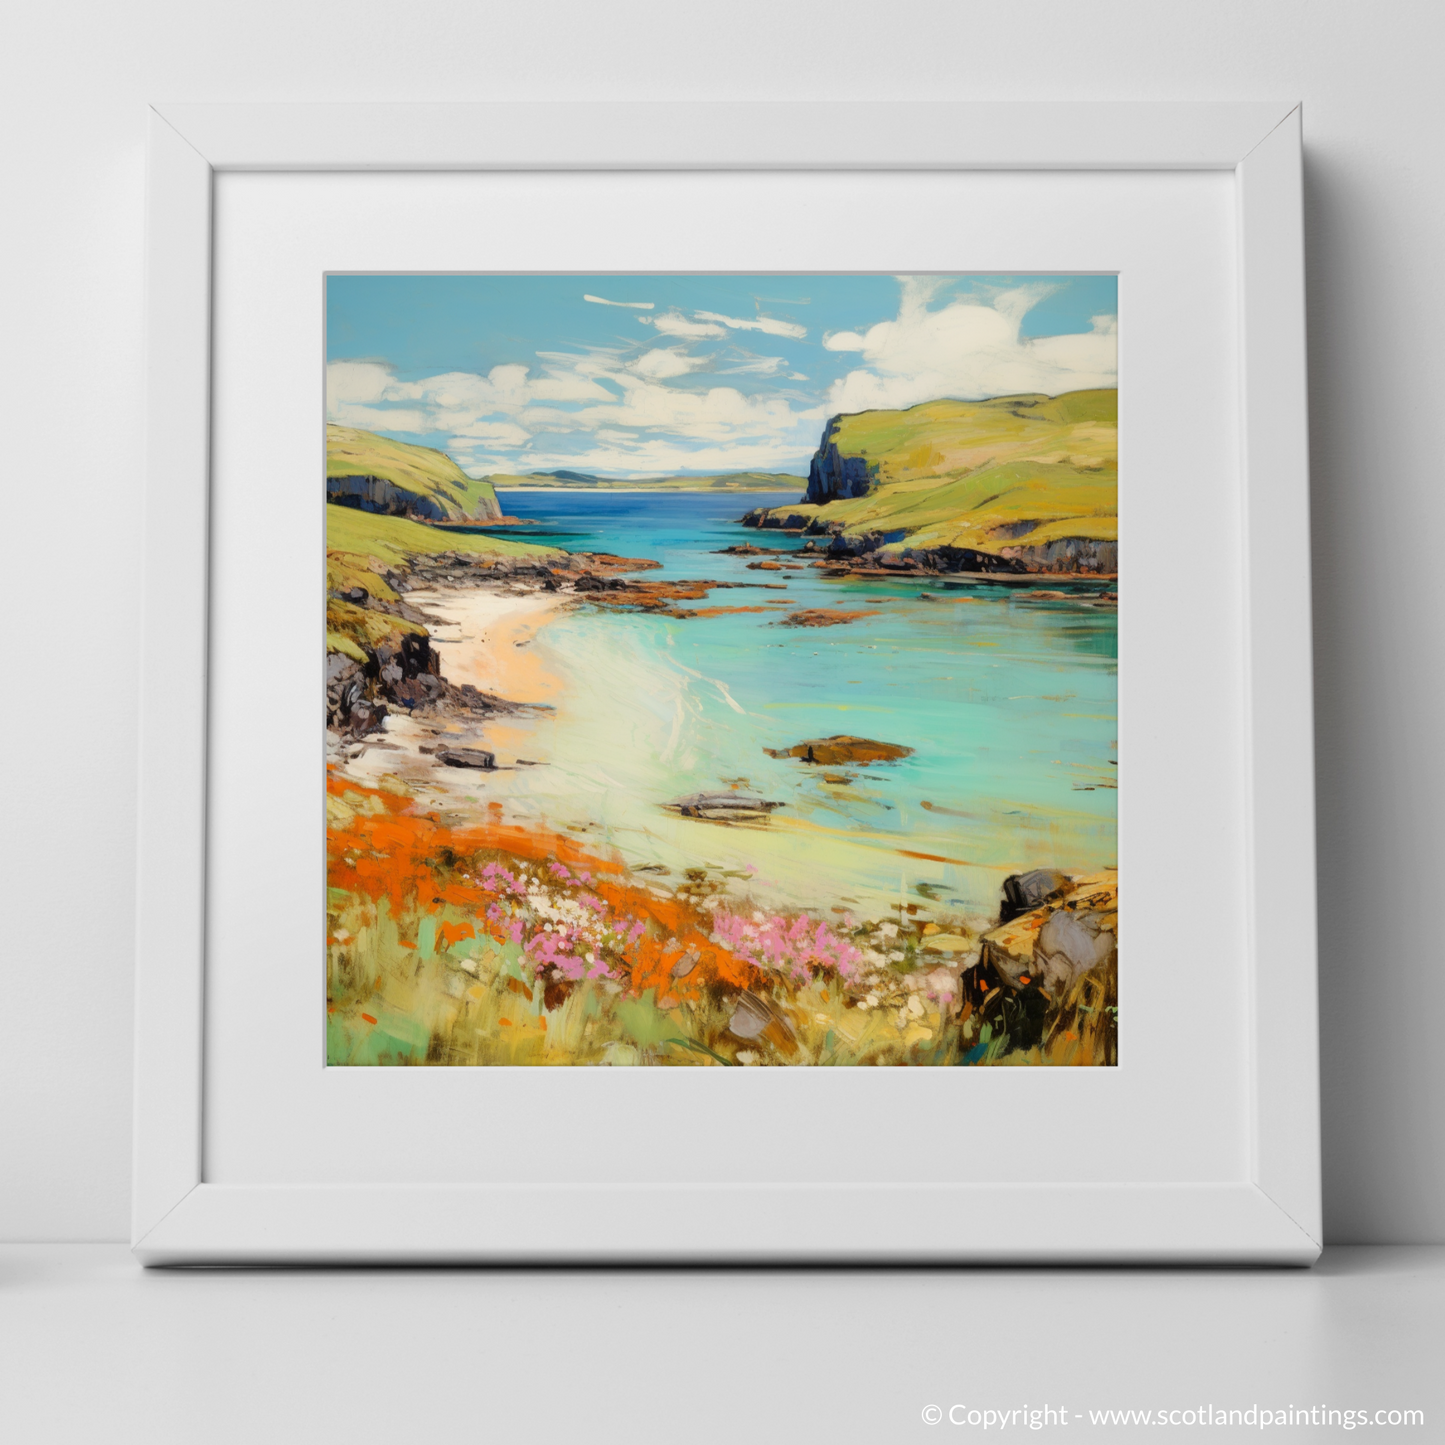 Art Print of Calgary Bay, Isle of Mull in summer with a white frame